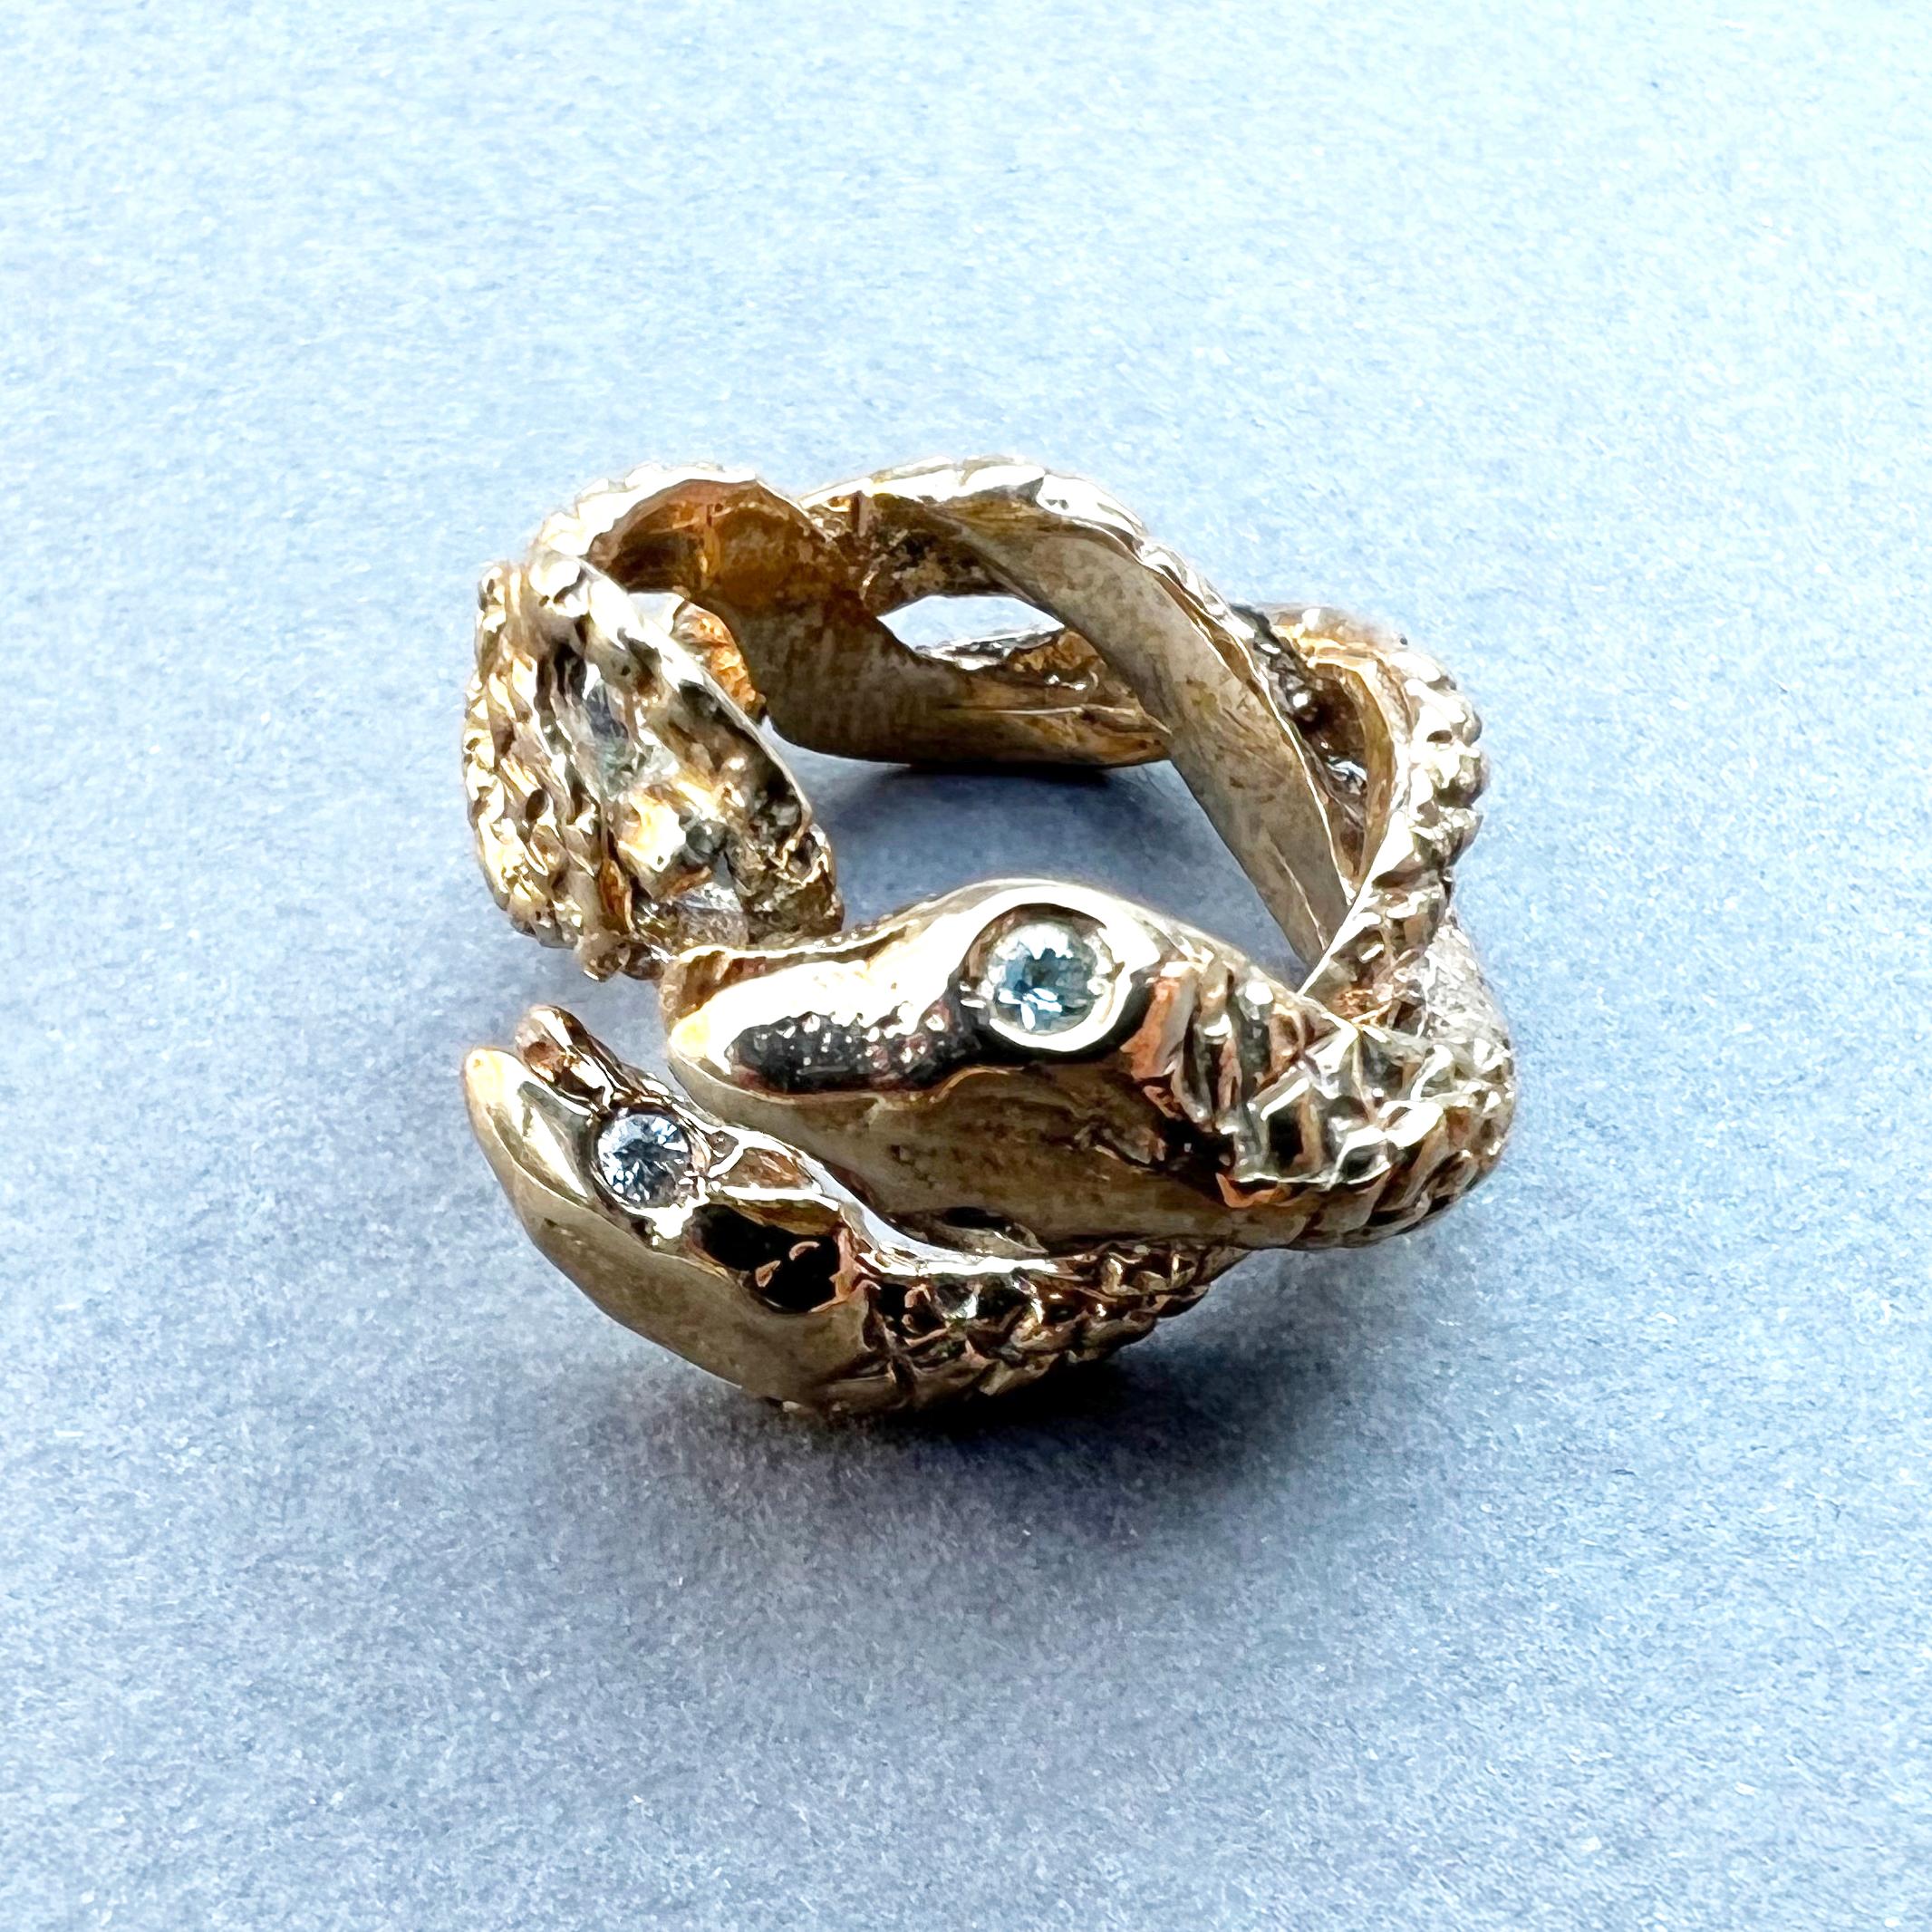 Round Cut Aquamarine Snake Ring Bronze Cocktail Ring J Dauphin For Sale